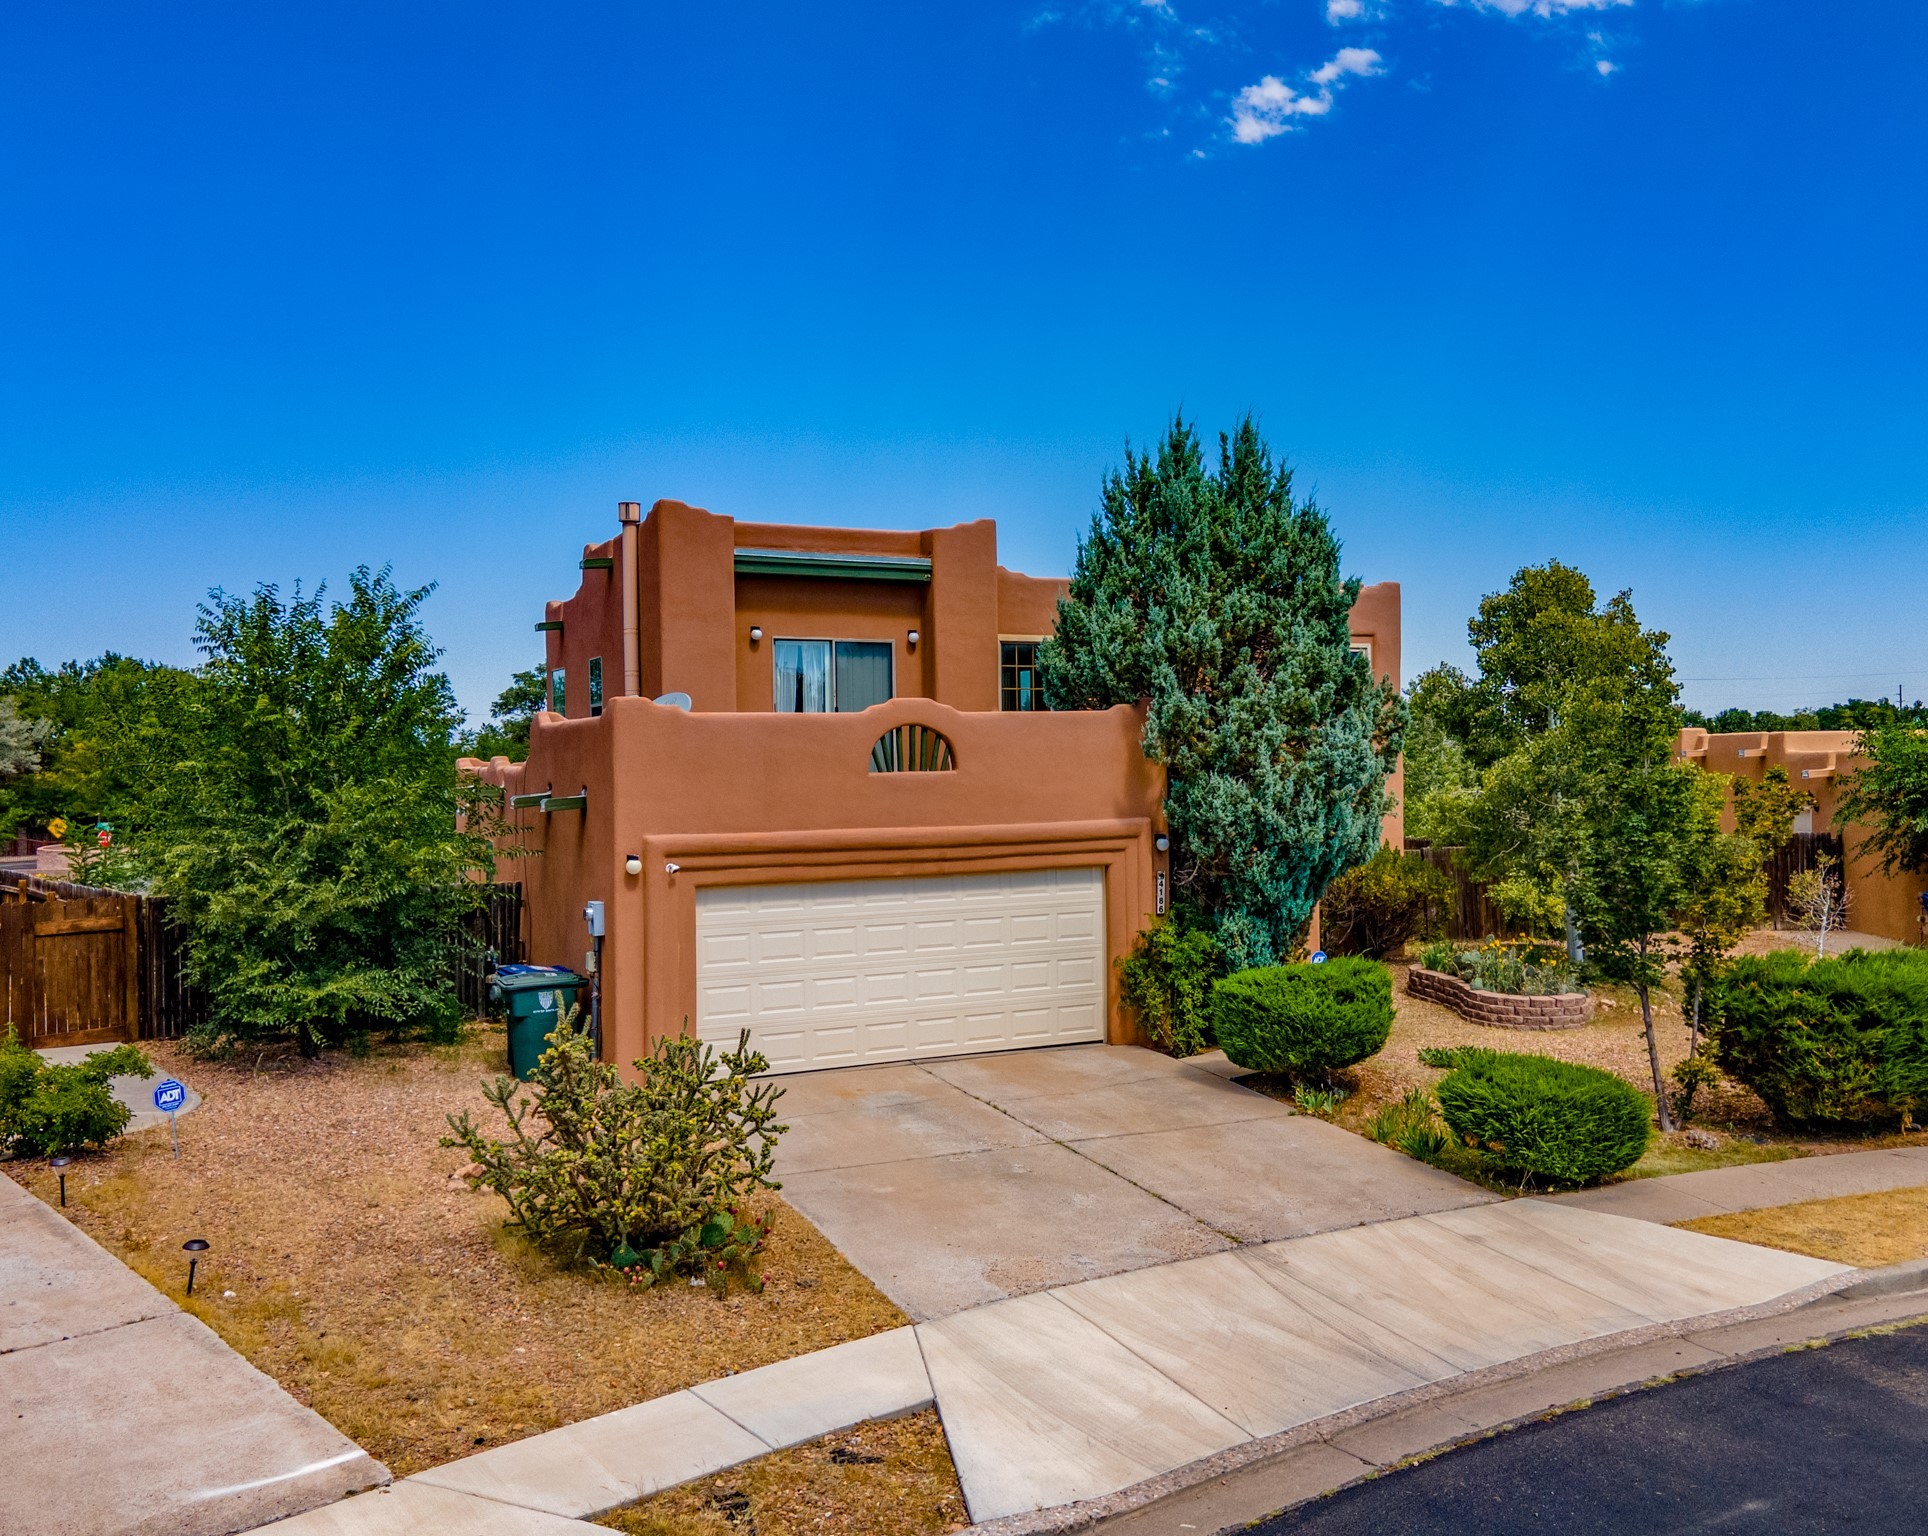 4186 Cheyenne Circle, Santa Fe, New Mexico 87507, 3 Bedrooms Bedrooms, ,2 BathroomsBathrooms,Residential,For Sale,4186 Cheyenne Circle,202232953